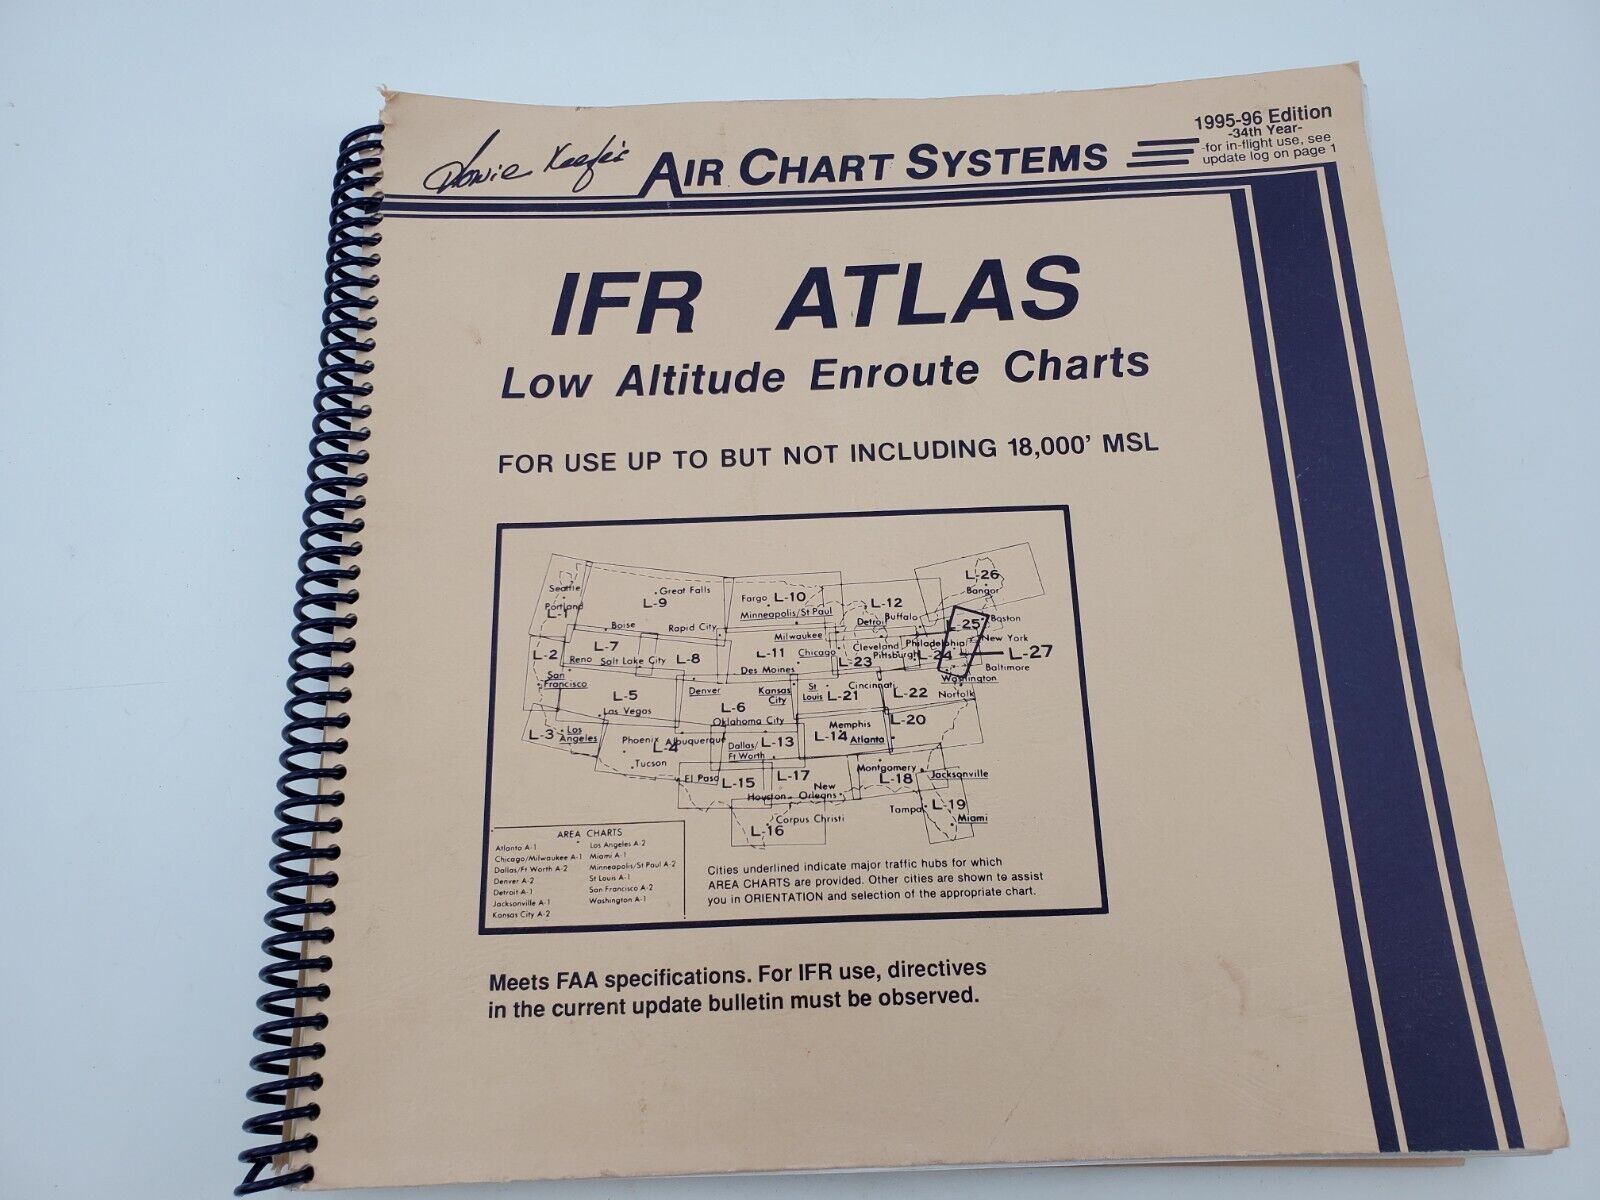 IFR Atlas Low Altitude Enroute Charts Air Chart Book 1995-96 Edition